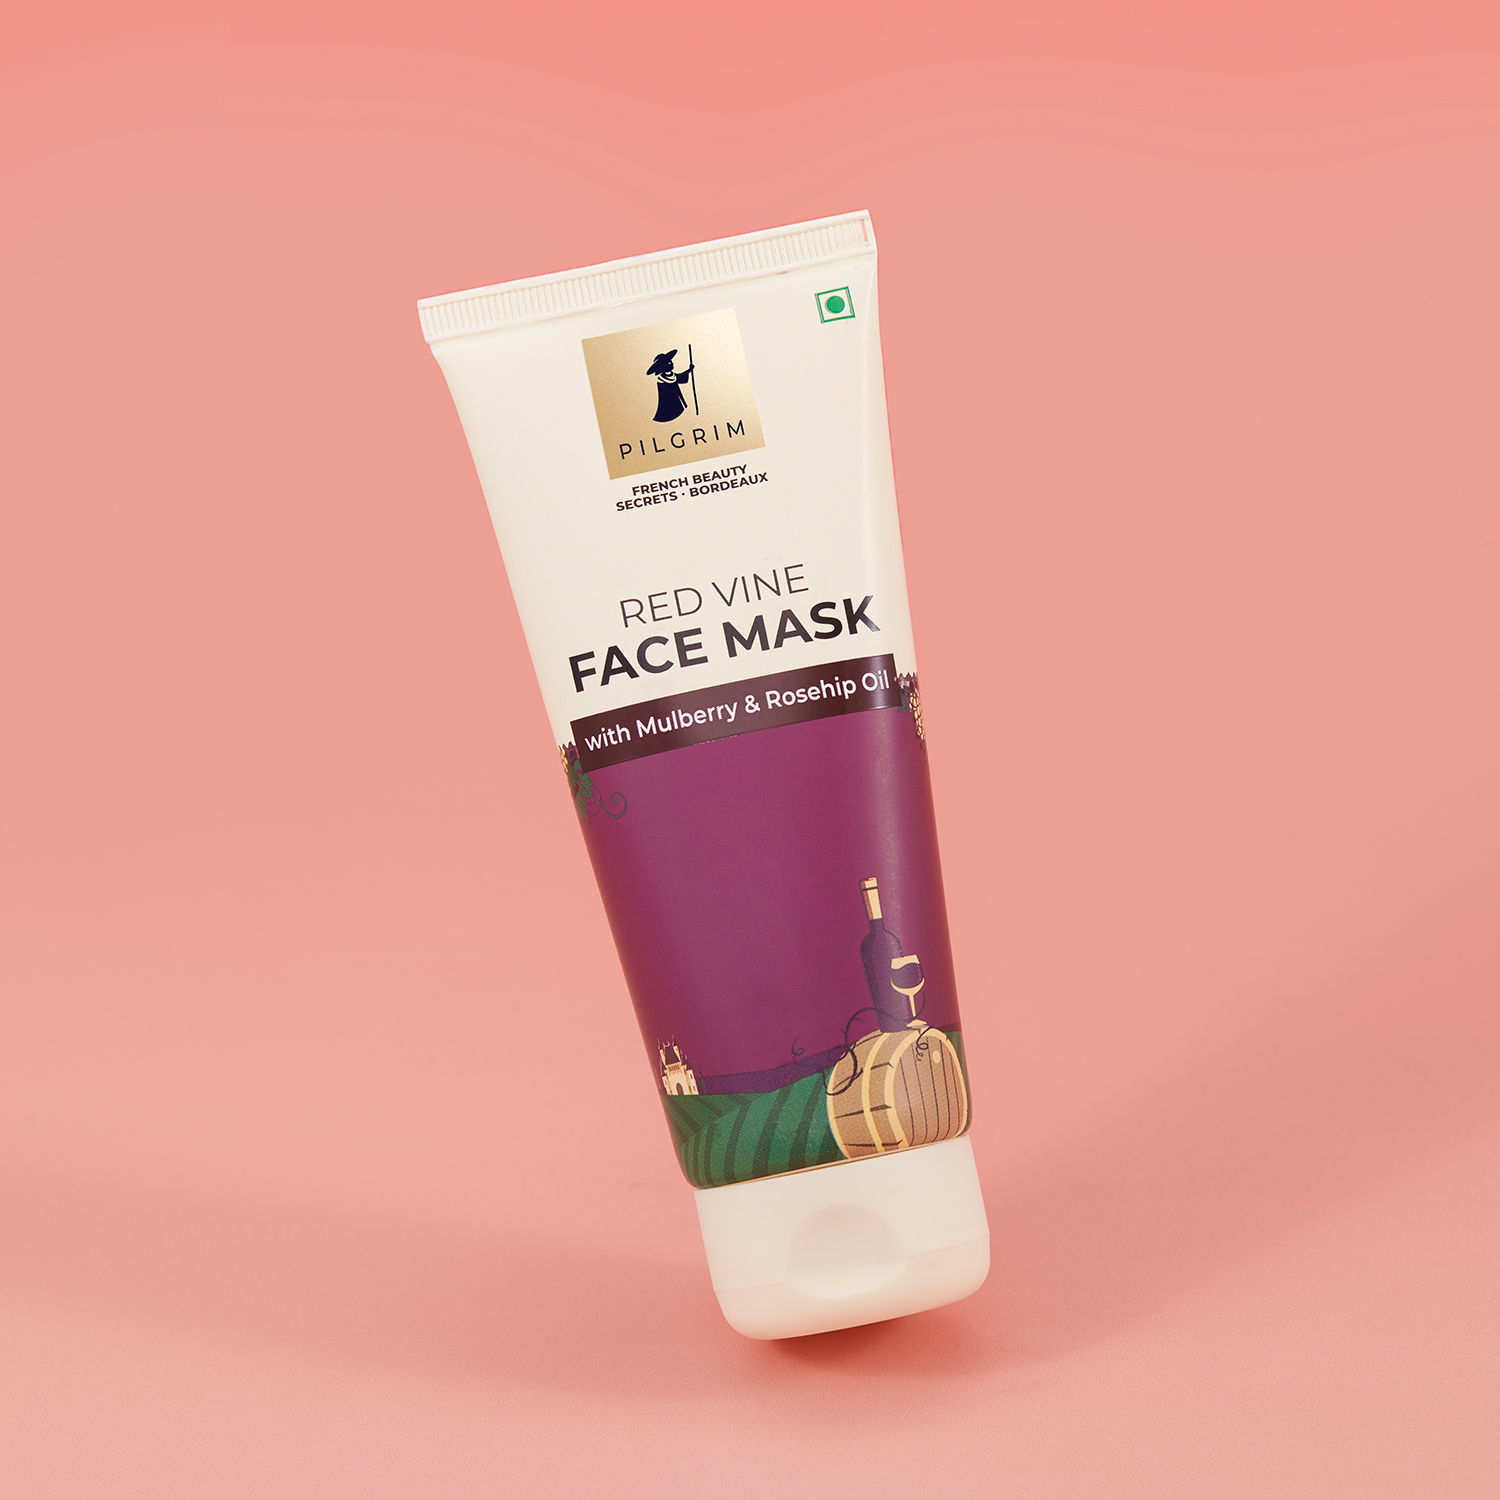 Buy Pilgrim Red Vine Face Mask With Mulberry & Rosehip Oil |Instantly Lifts Face Enhances Natural Glow (100 g) - Purplle